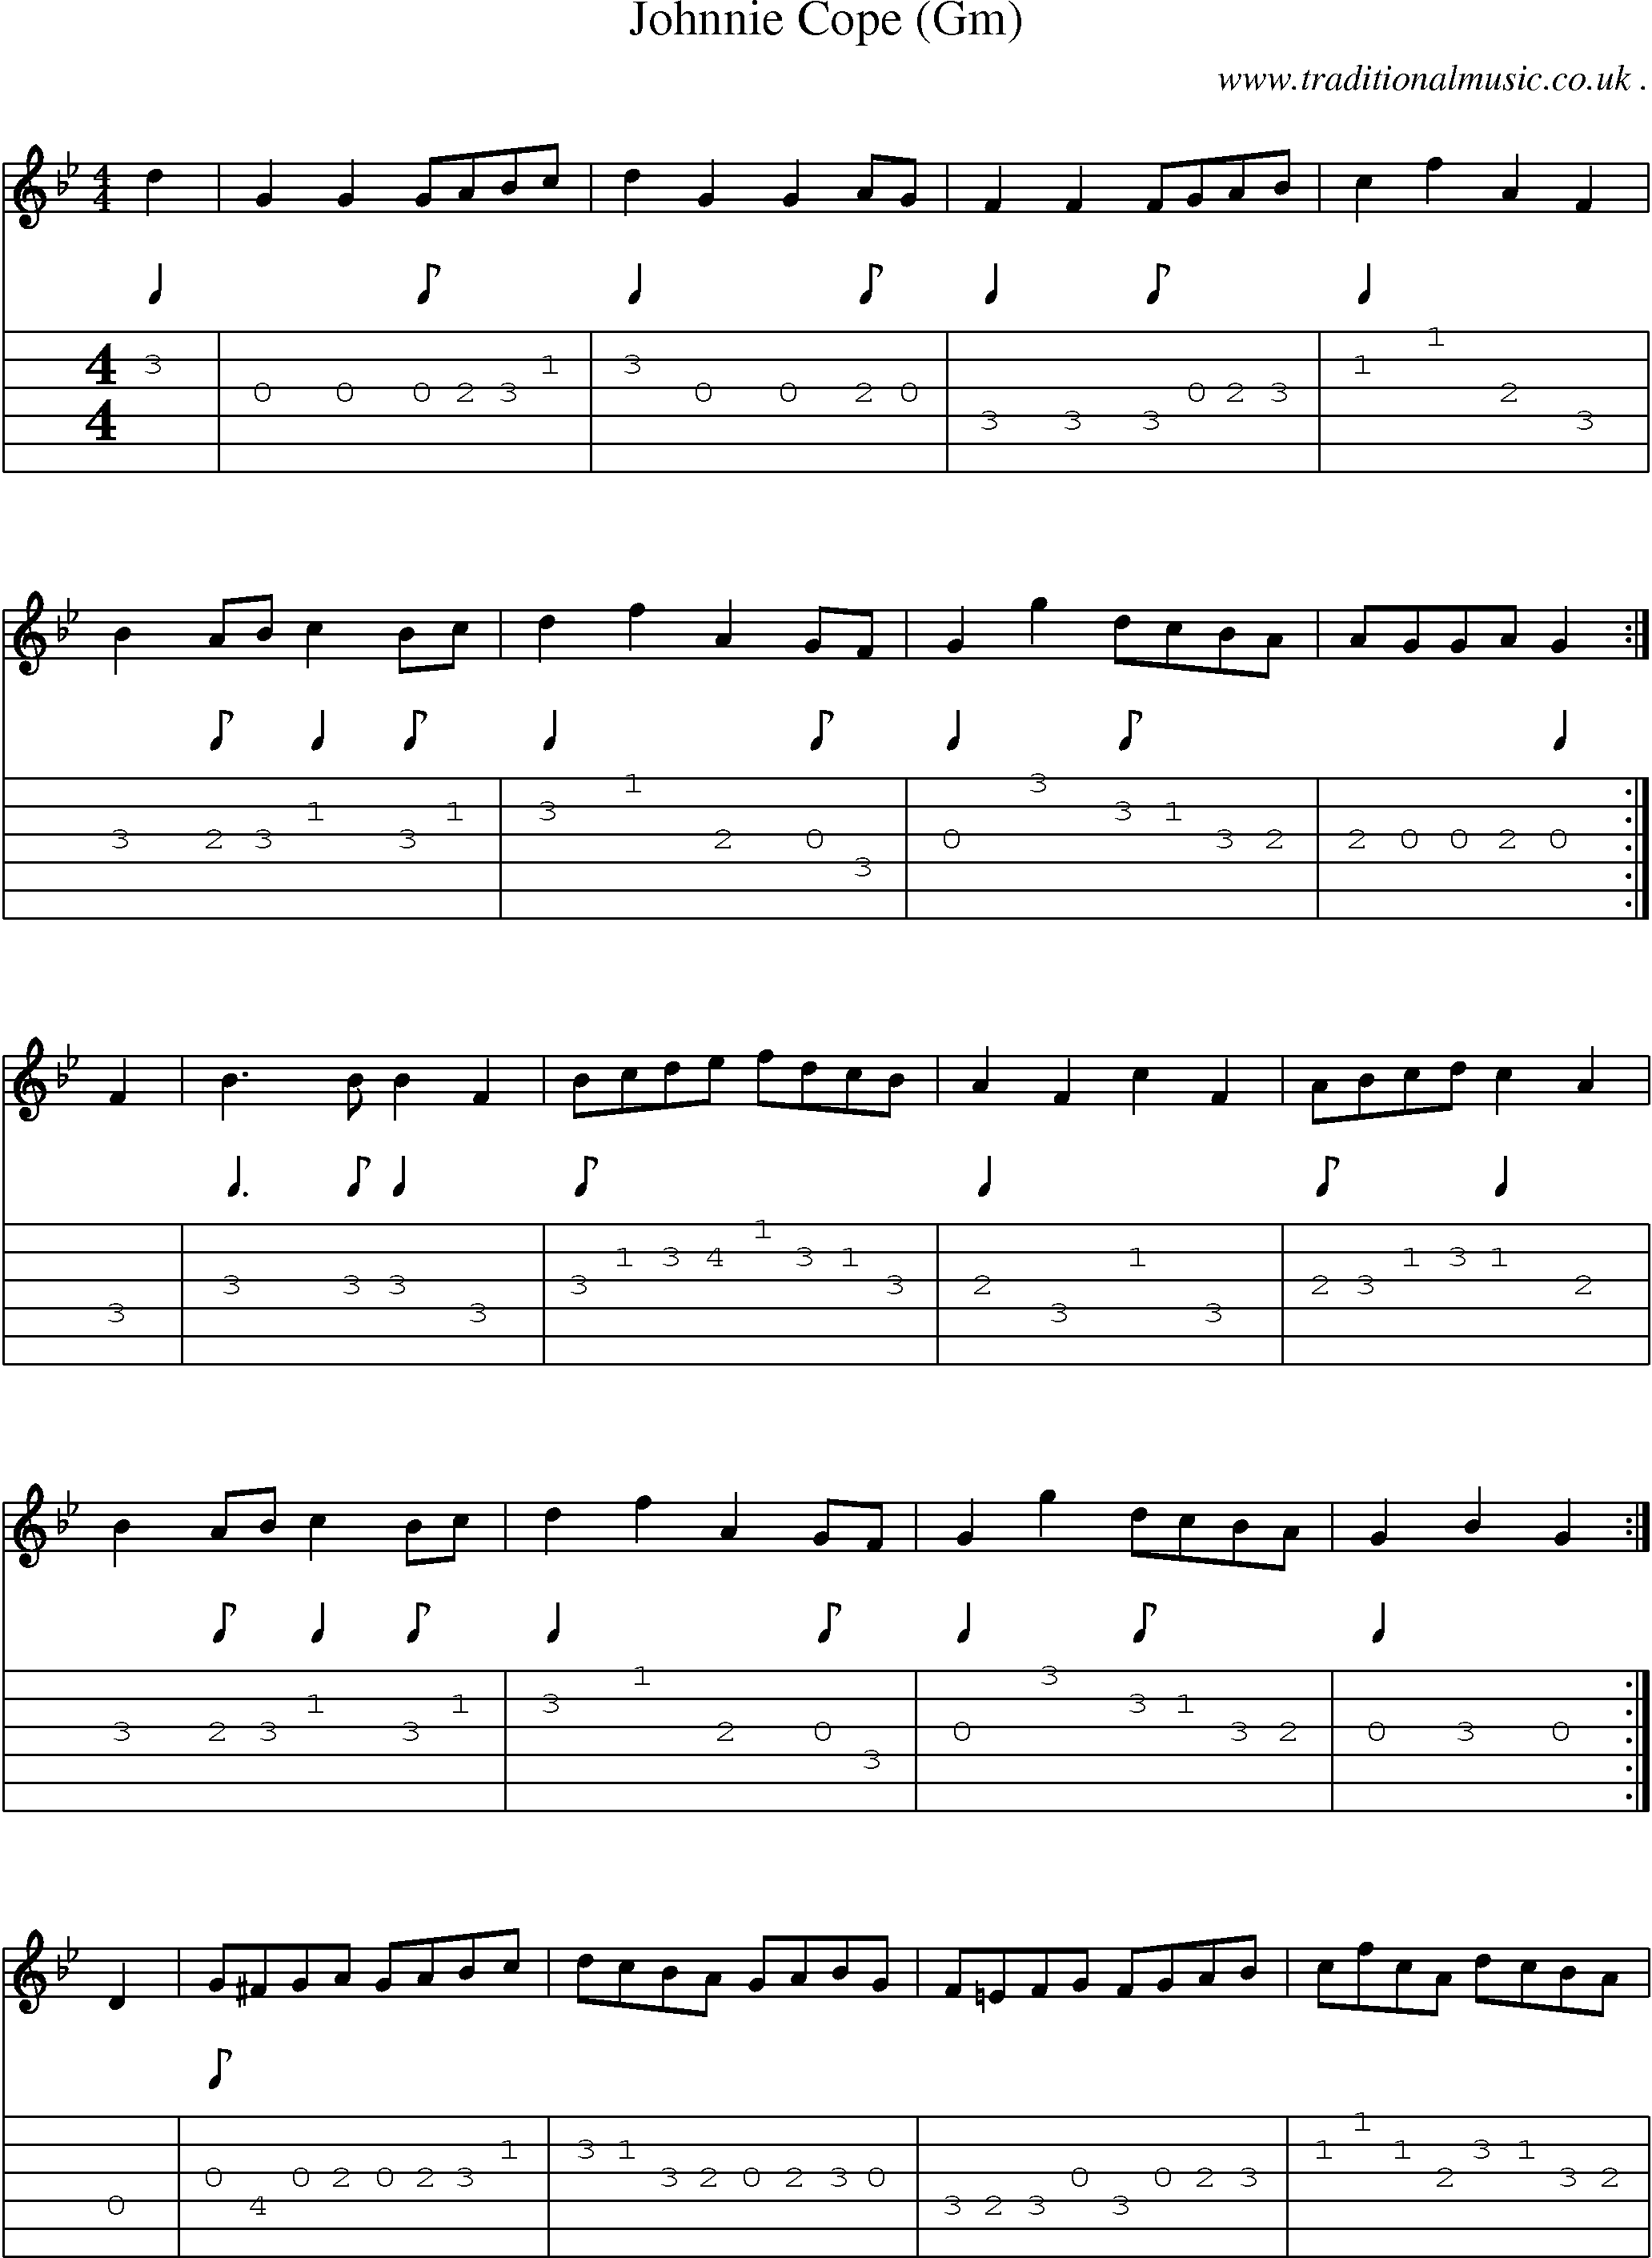 Sheet-music  score, Chords and Guitar Tabs for Johnnie Cope Gm